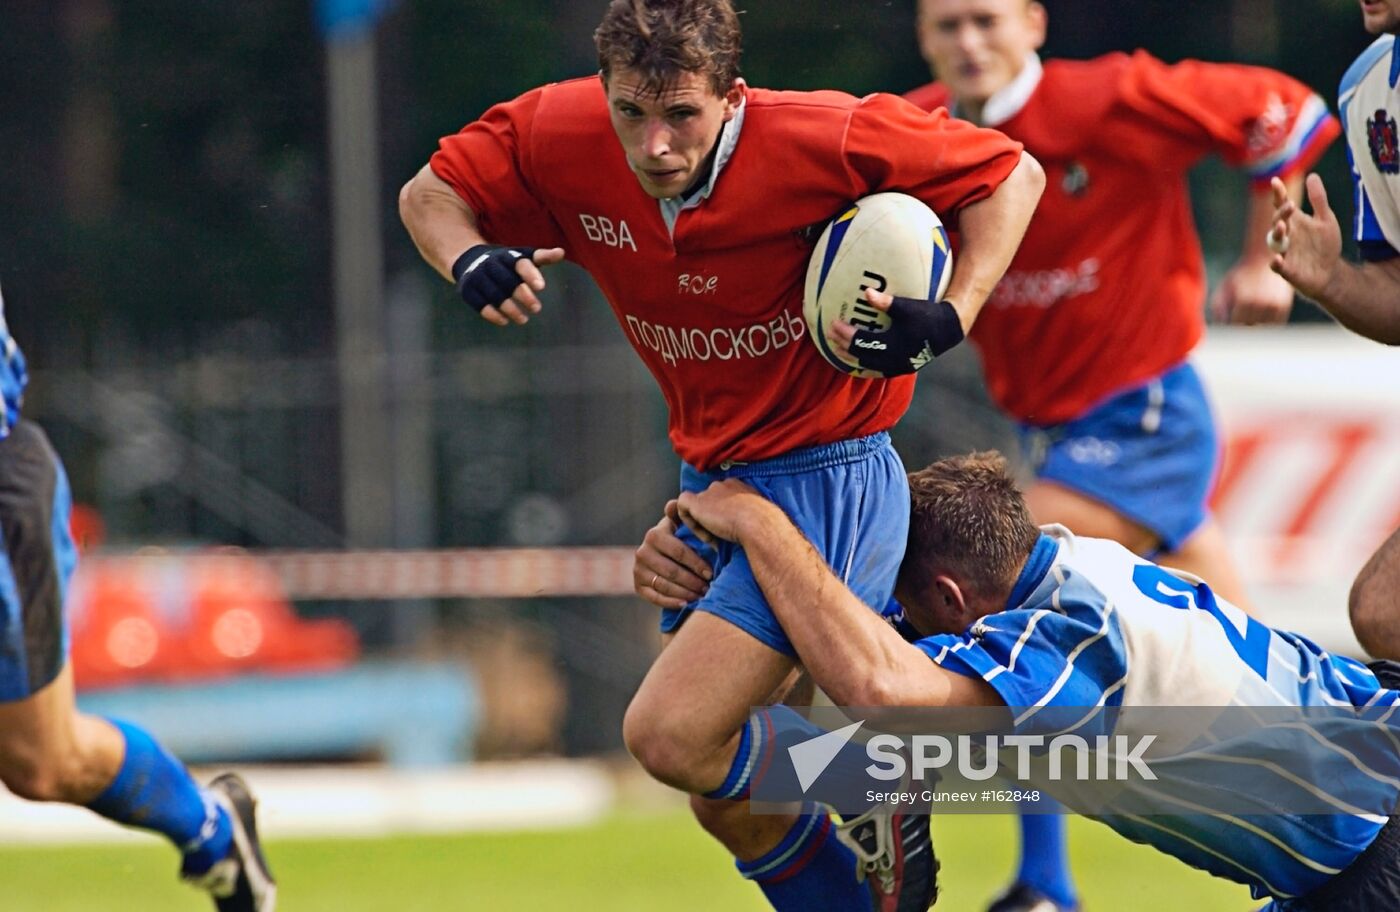 RUGBY MATCH RUSSIAN RUGBY CHAMPIONSHIP 